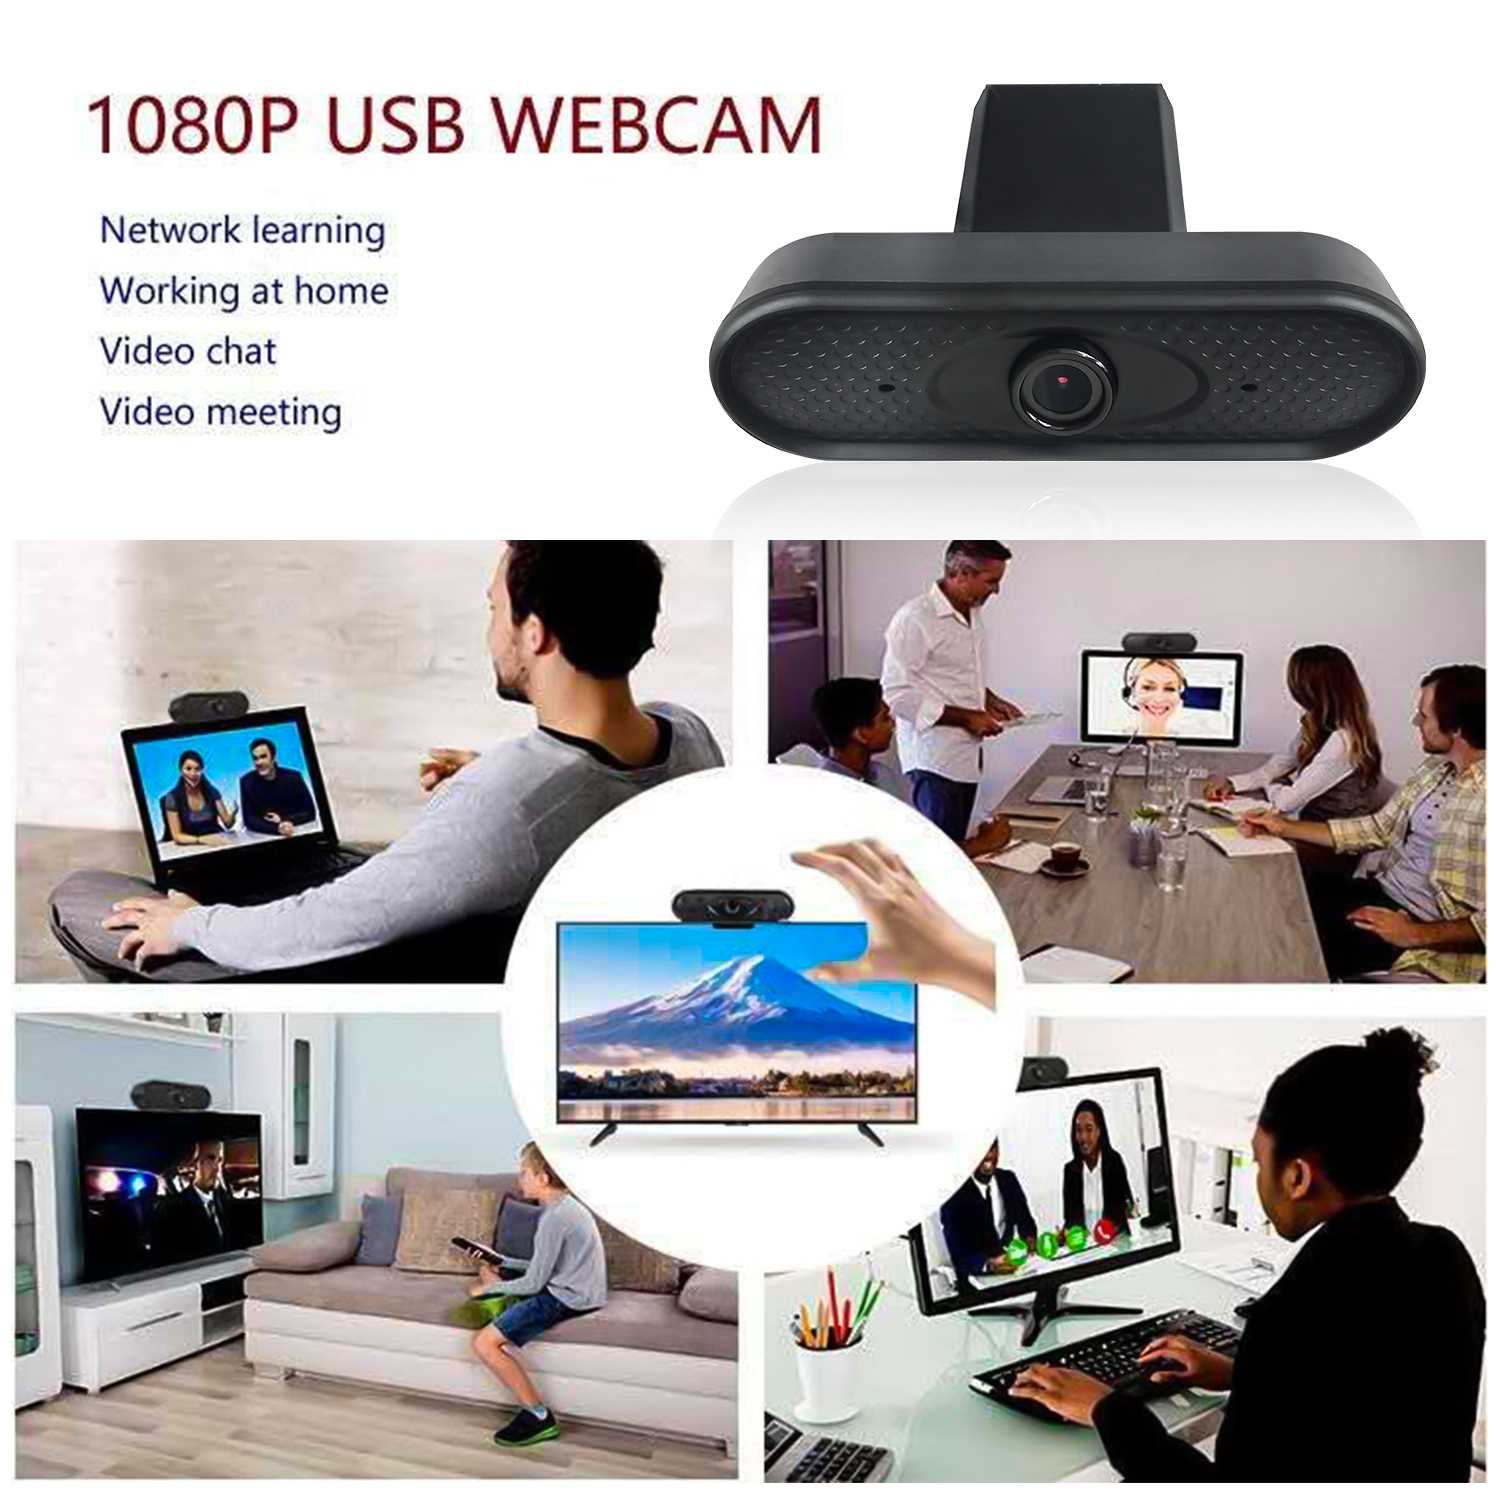 1080P-HD-USB-Webcam-Conference-Live-Manual-Focus-Computer-Camera-Built-in-Omni-directional-Micphone--1674541-7